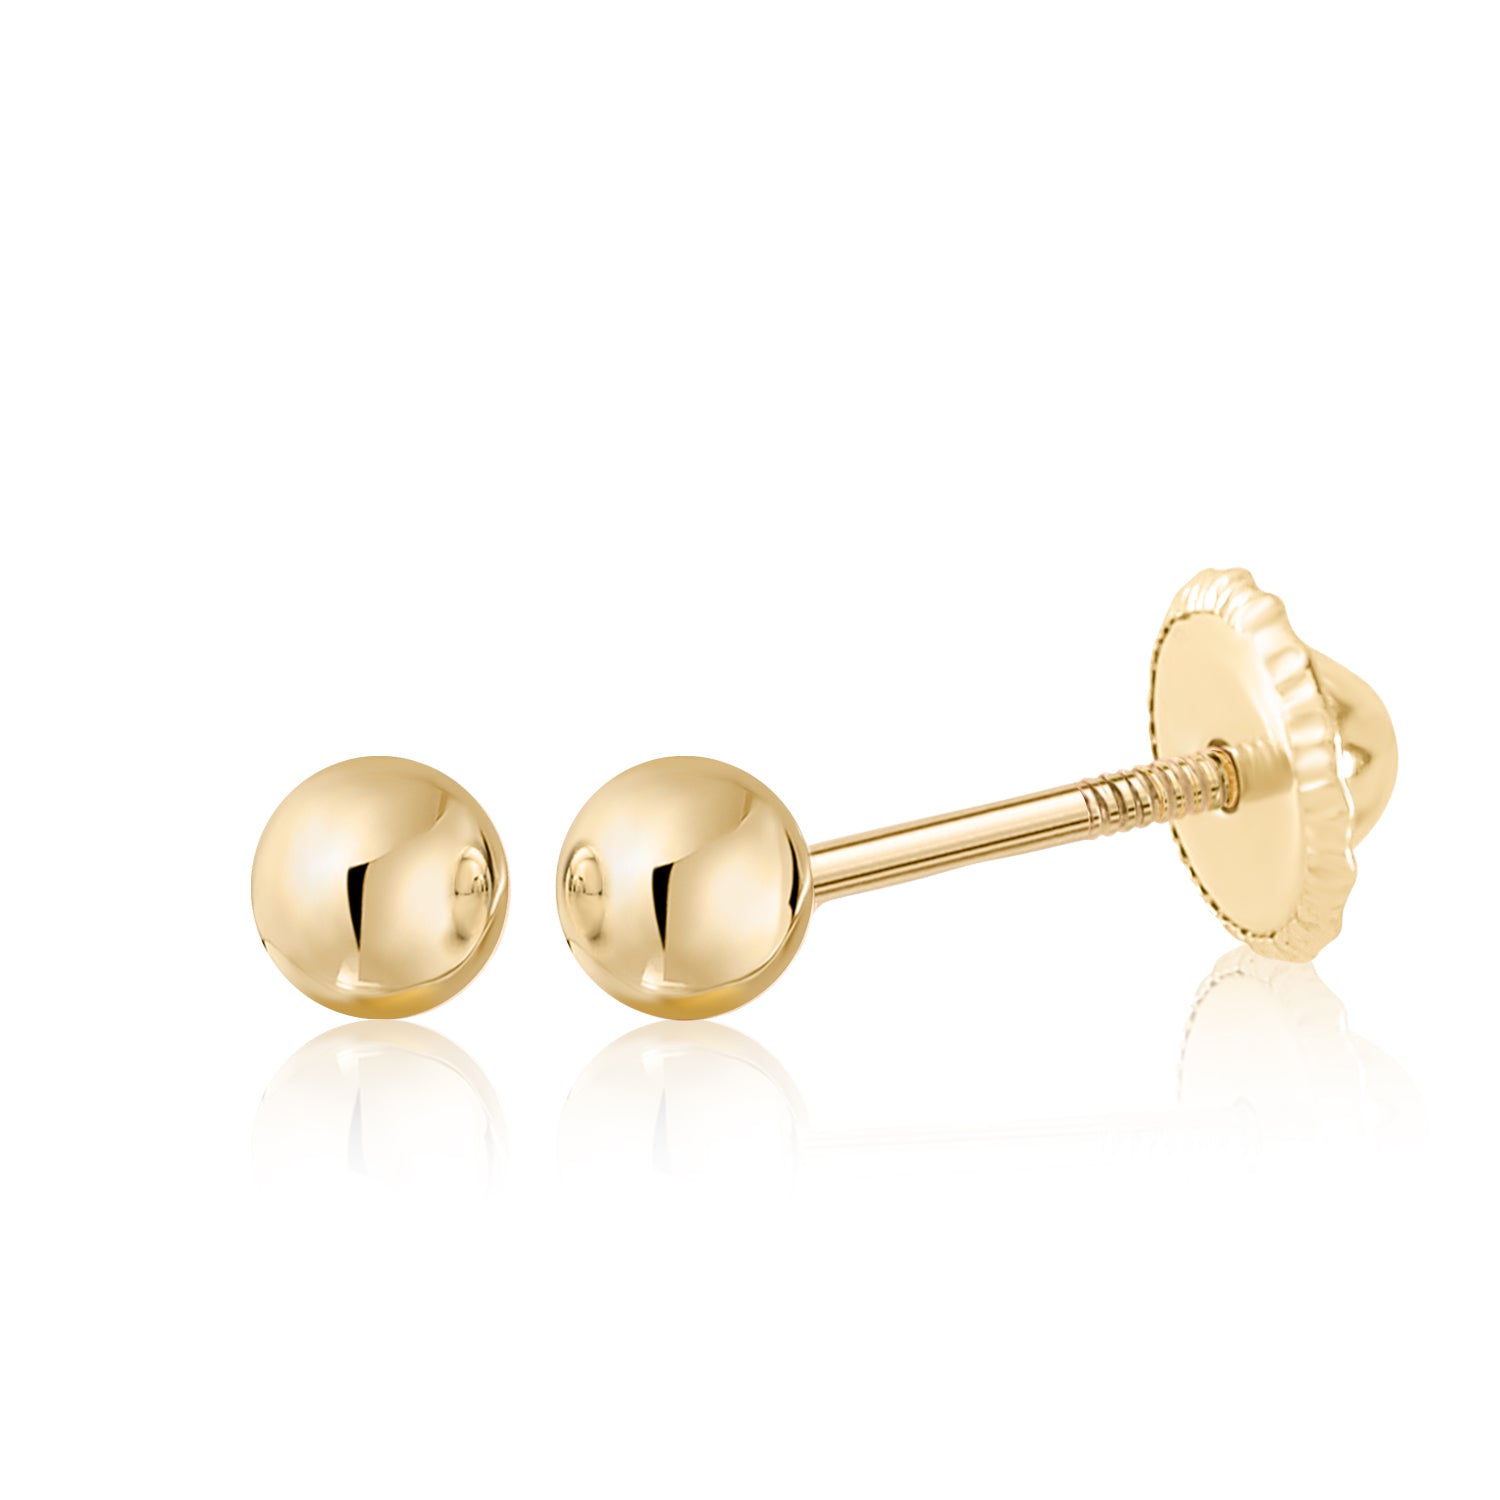 14K Yellow Gold Young Girl's Round Diamond Cut Ball Screw Back Earring  Studs for Young Girls & Preteens - Cute Ball Earrings with Safety Screw  Back